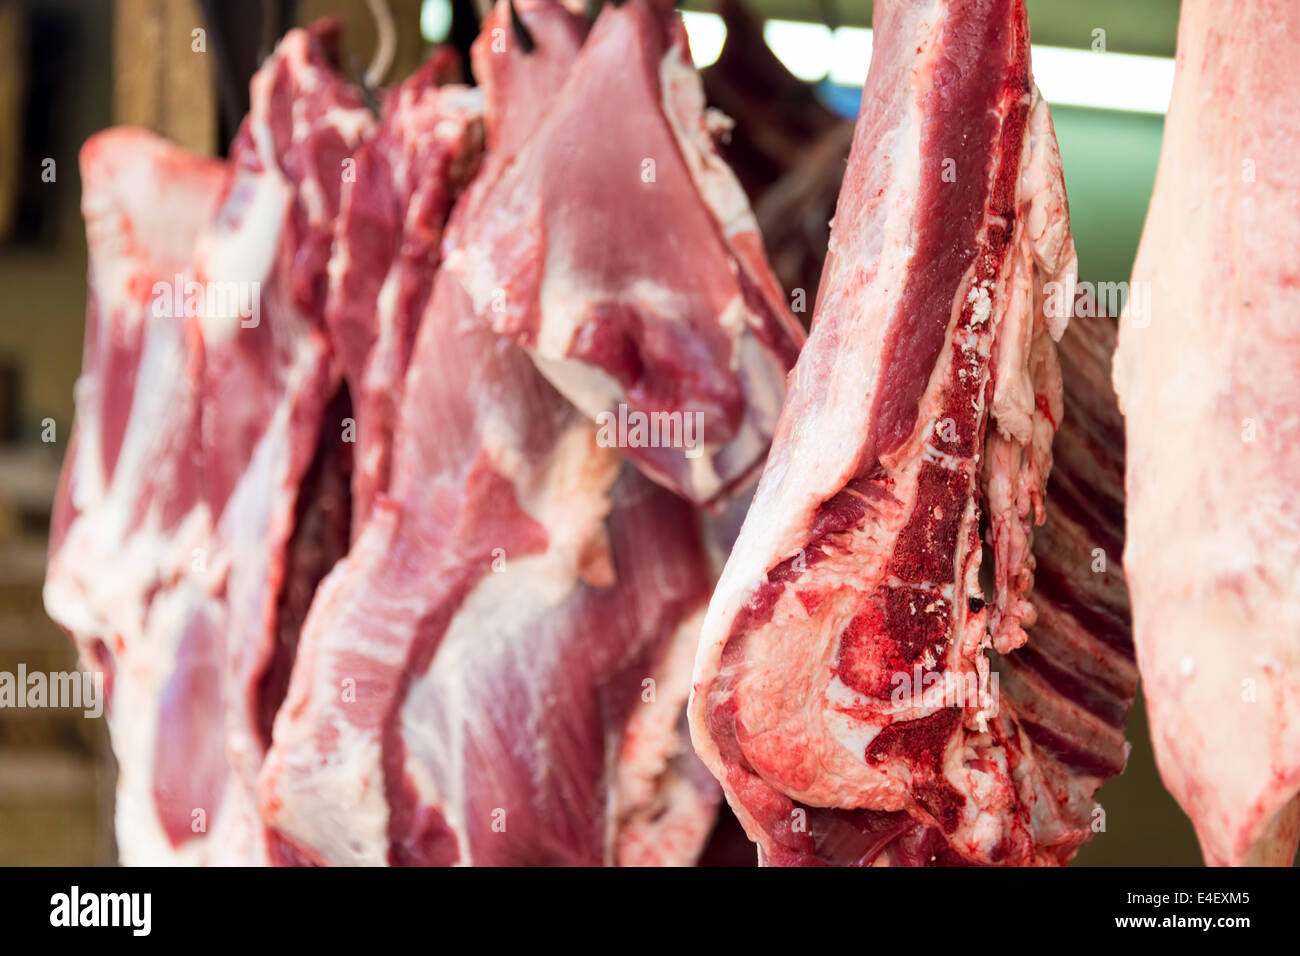 Chopped and cut meat hanging at the market in Old Delhi, India Stock Photo